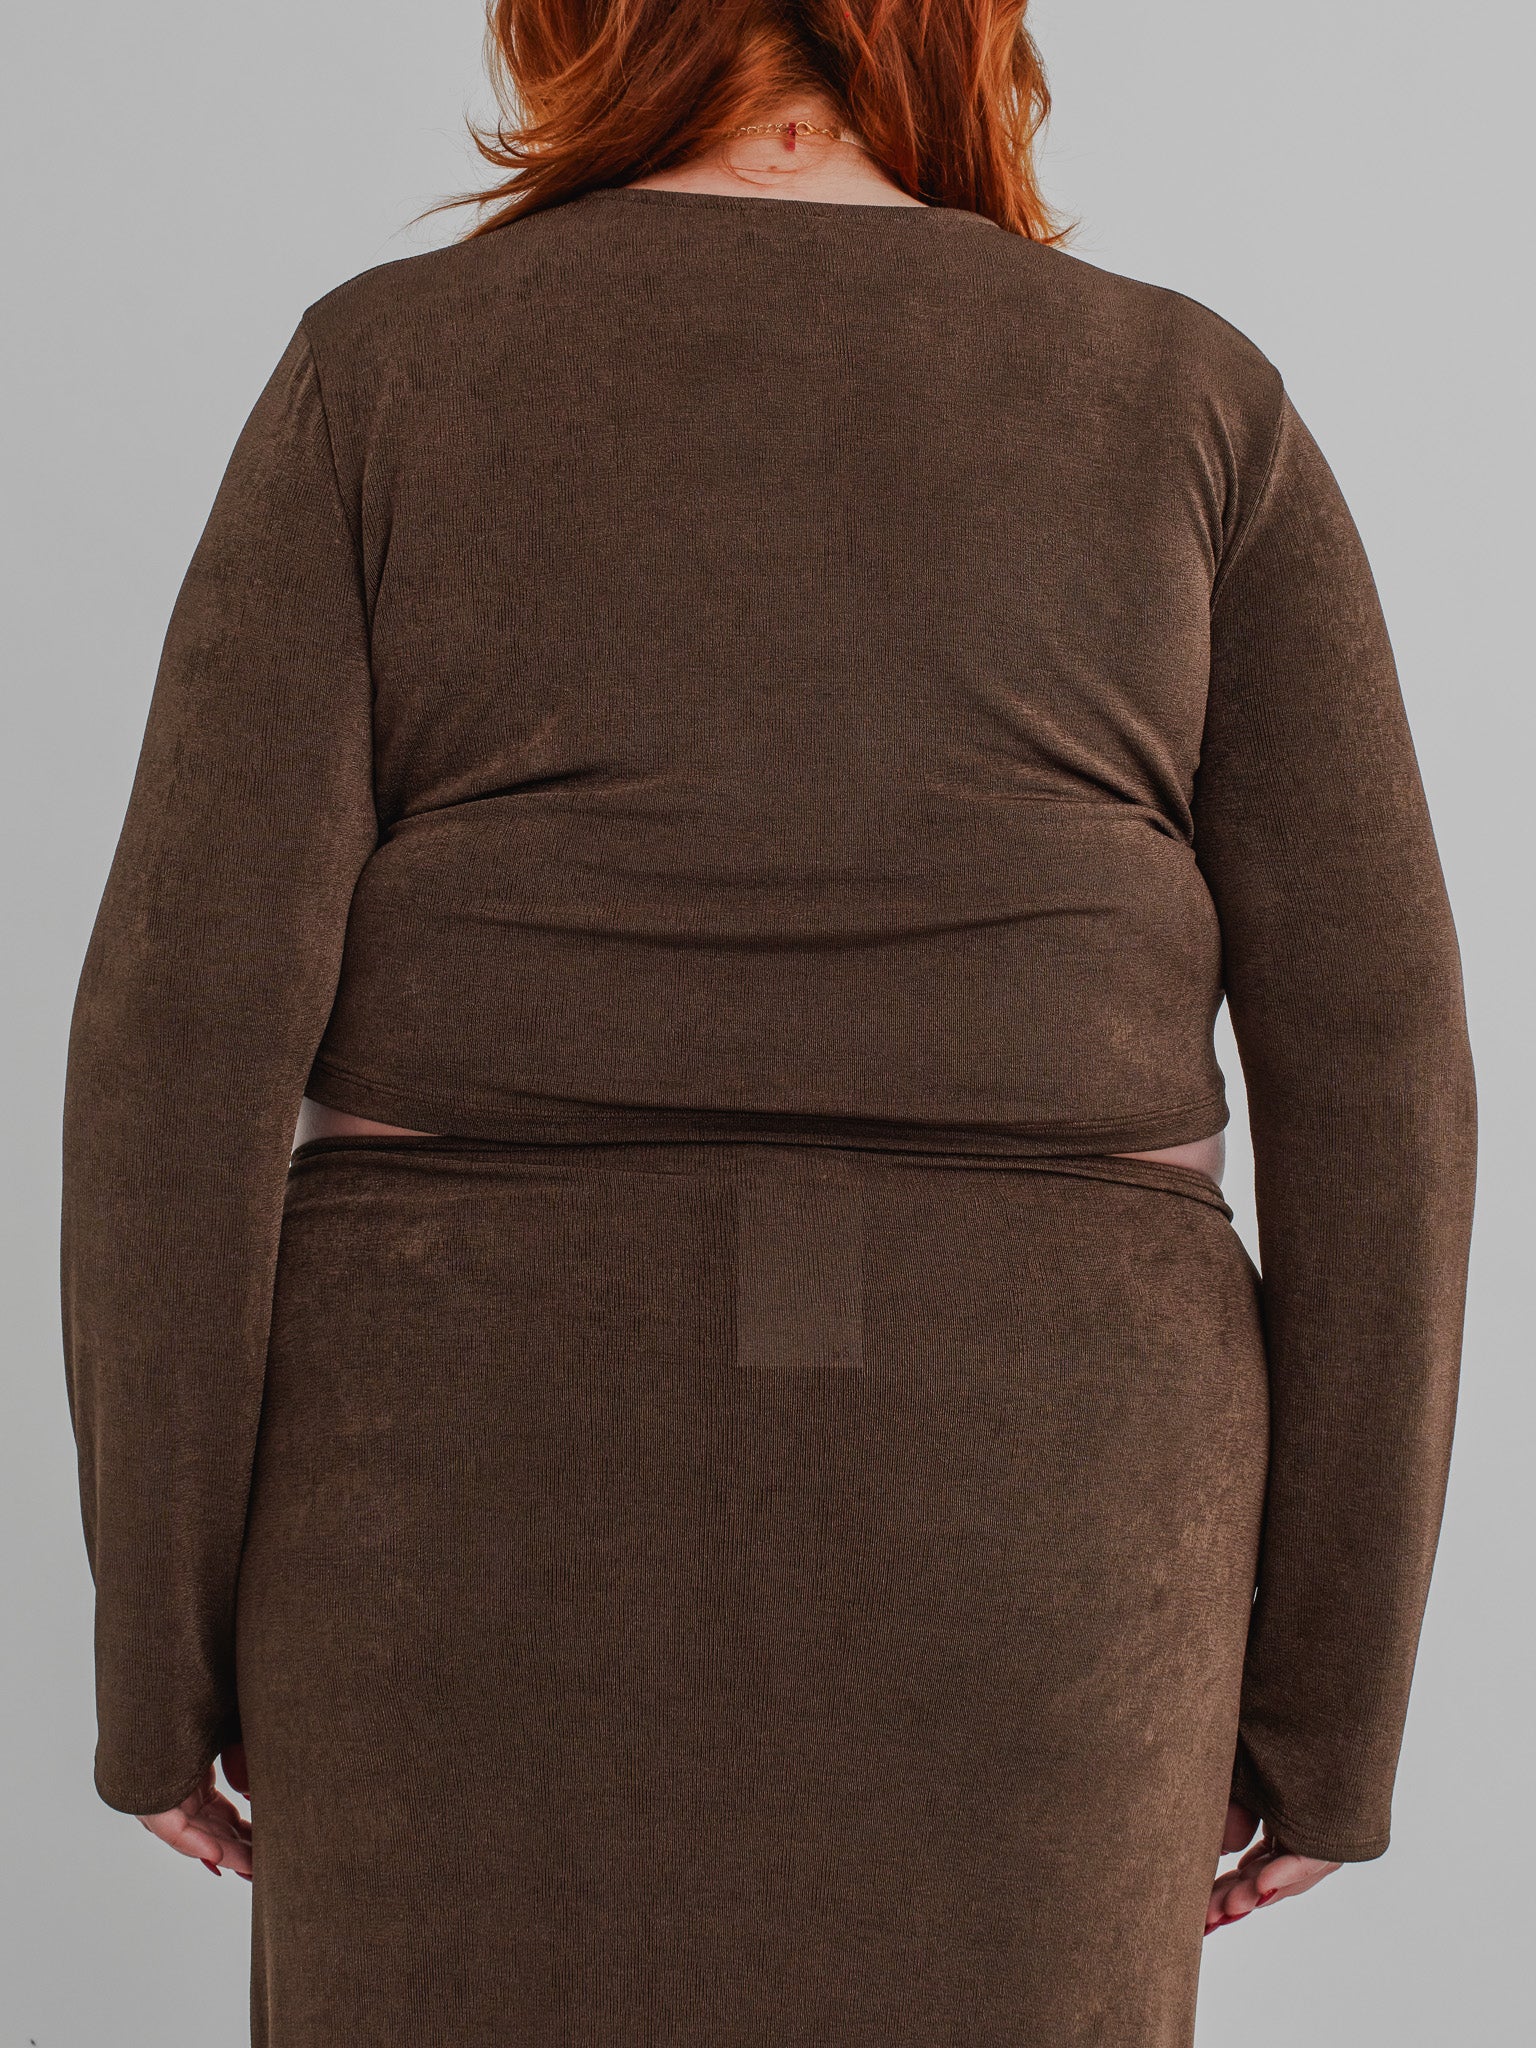 NLT - Brown Cut Out Long Sleeve